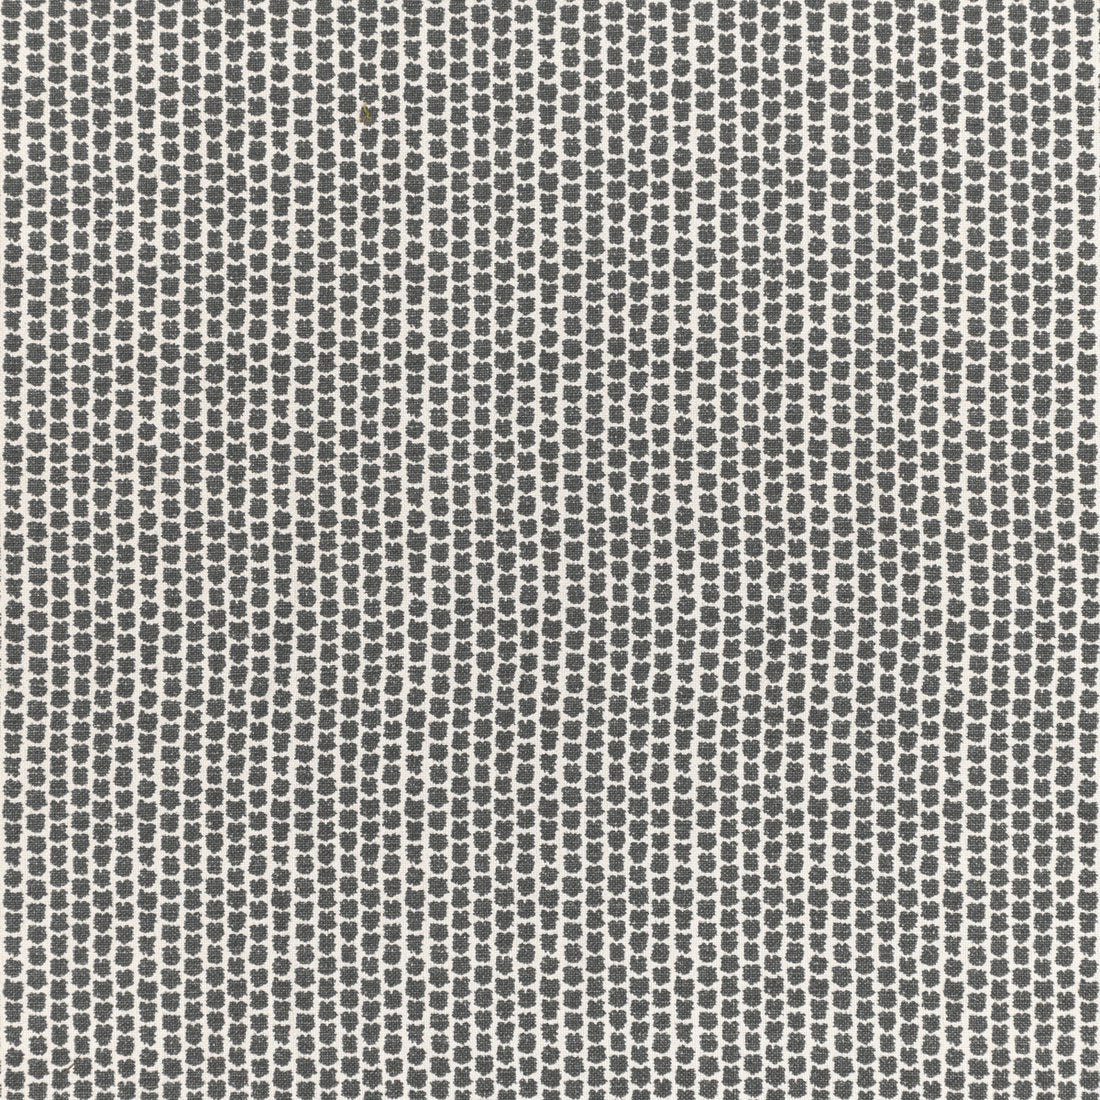 Kaya fabric in grey color - pattern 2012101.21.0 - by Lee Jofa in the Breckenridge collection